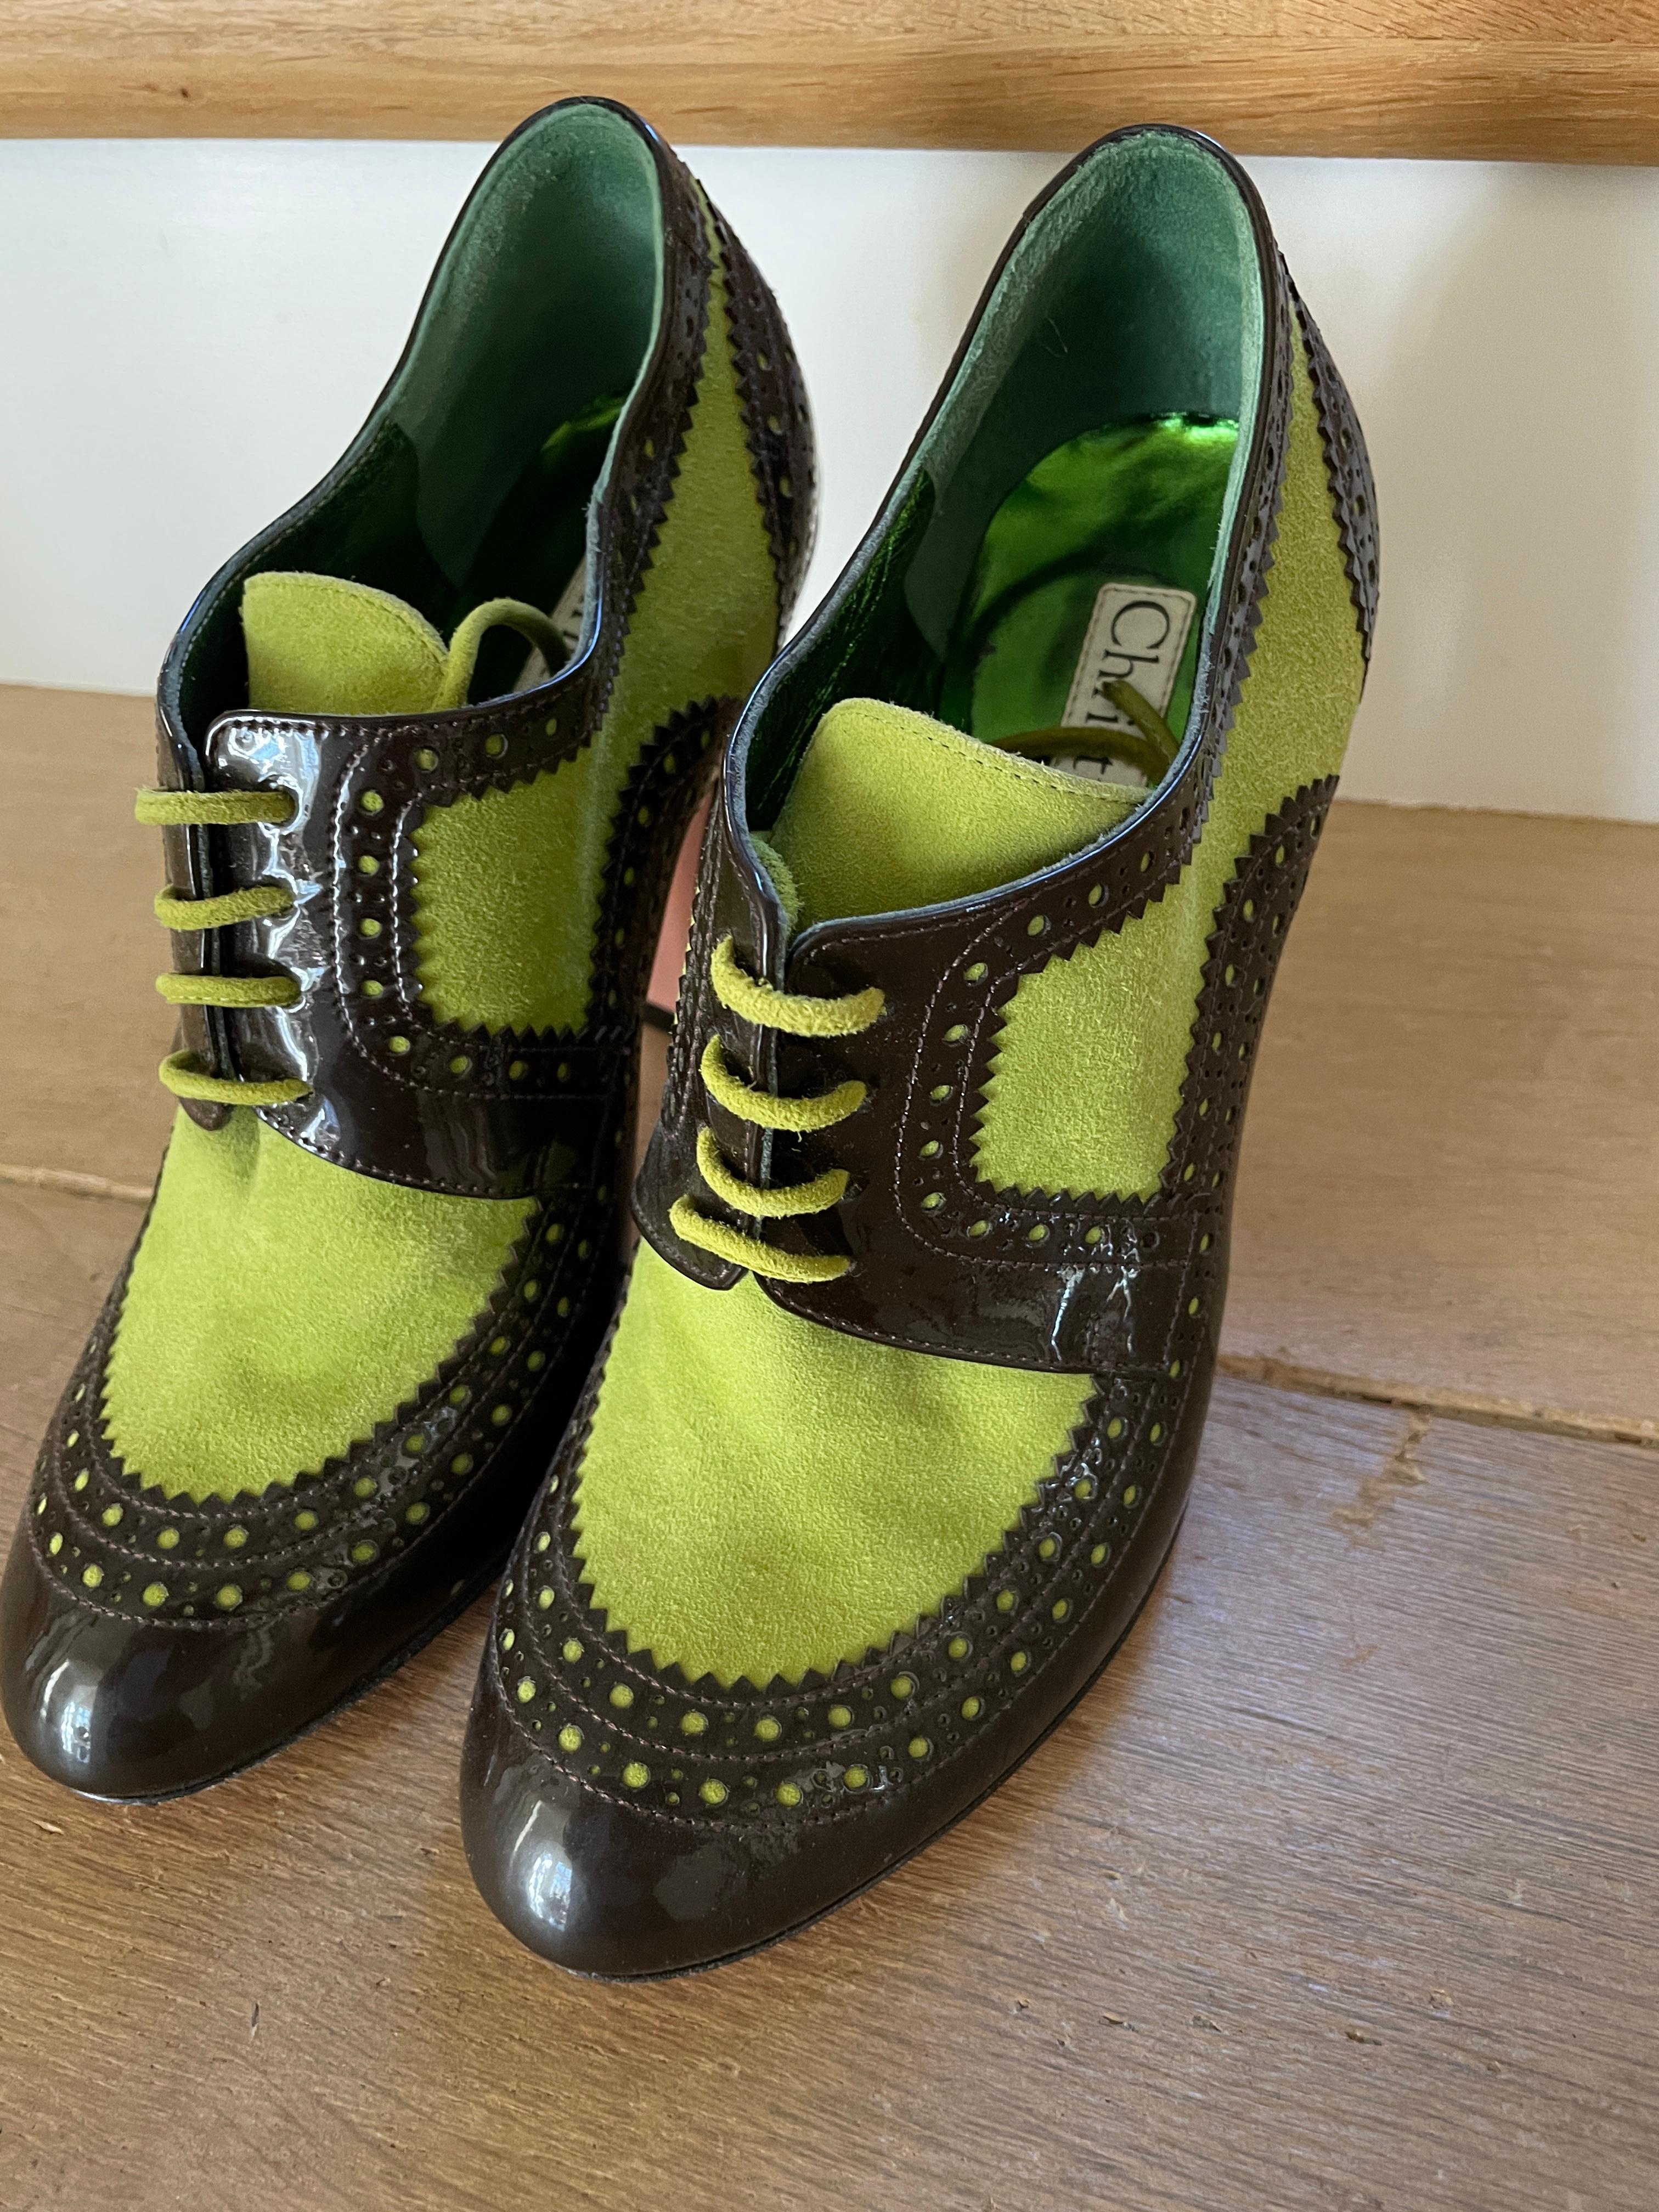 Christian Lacroix Vintage Green Suede and Patent Leather Spectator Pumps
Size 6.5
Excellent pre owned condition